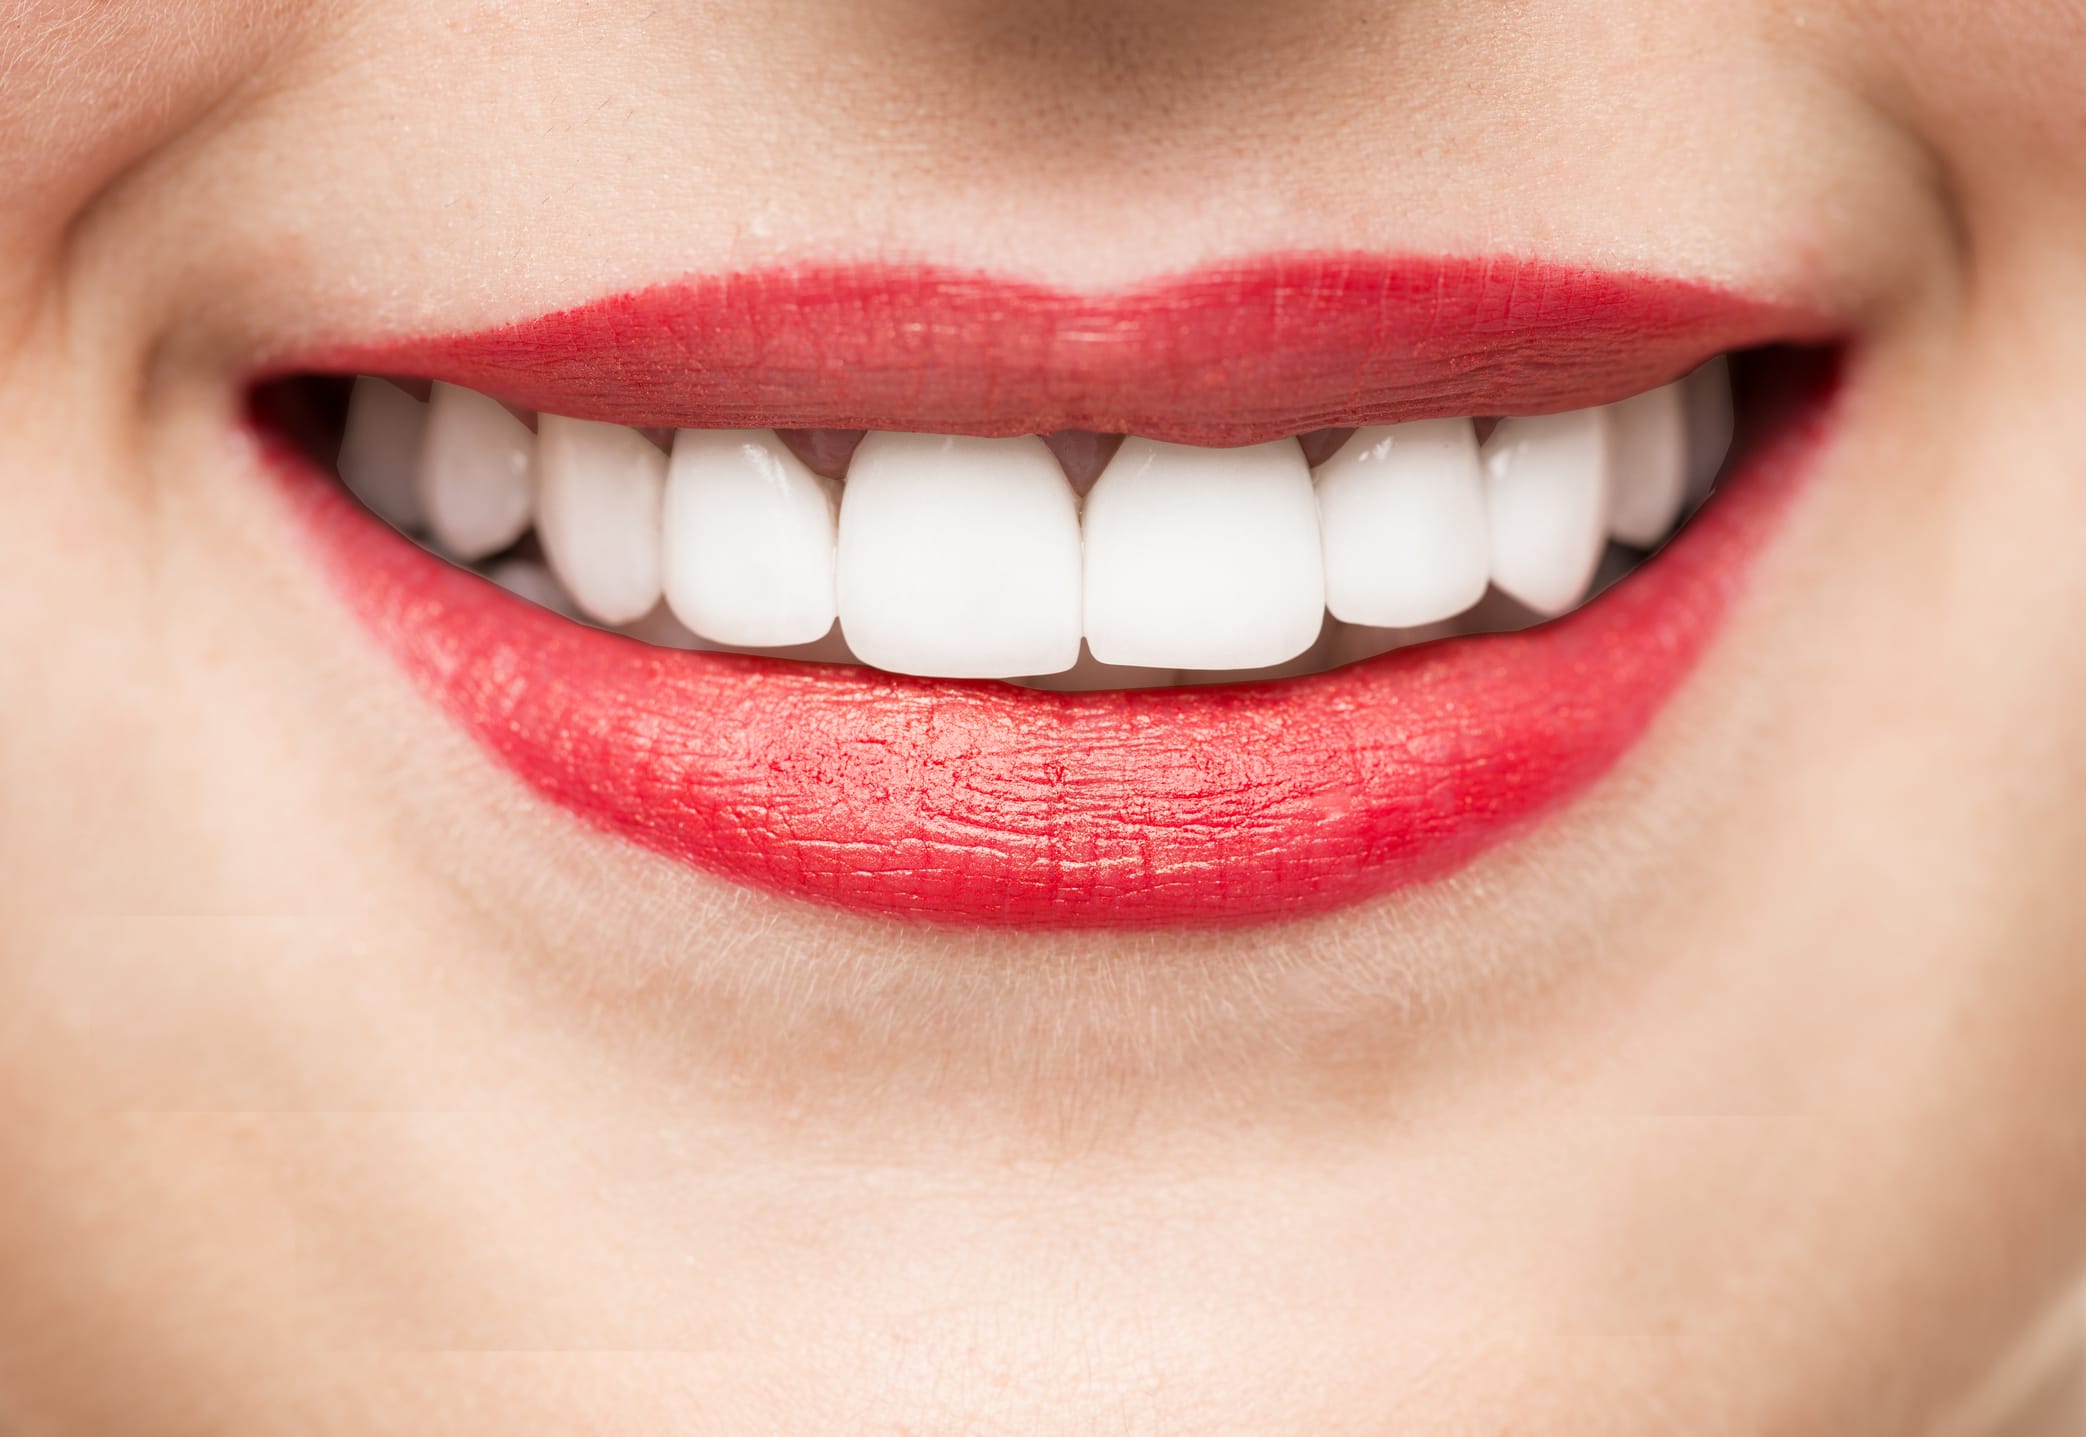 Is Smile Direct Club a good choice for your Orthodontic Treatment?